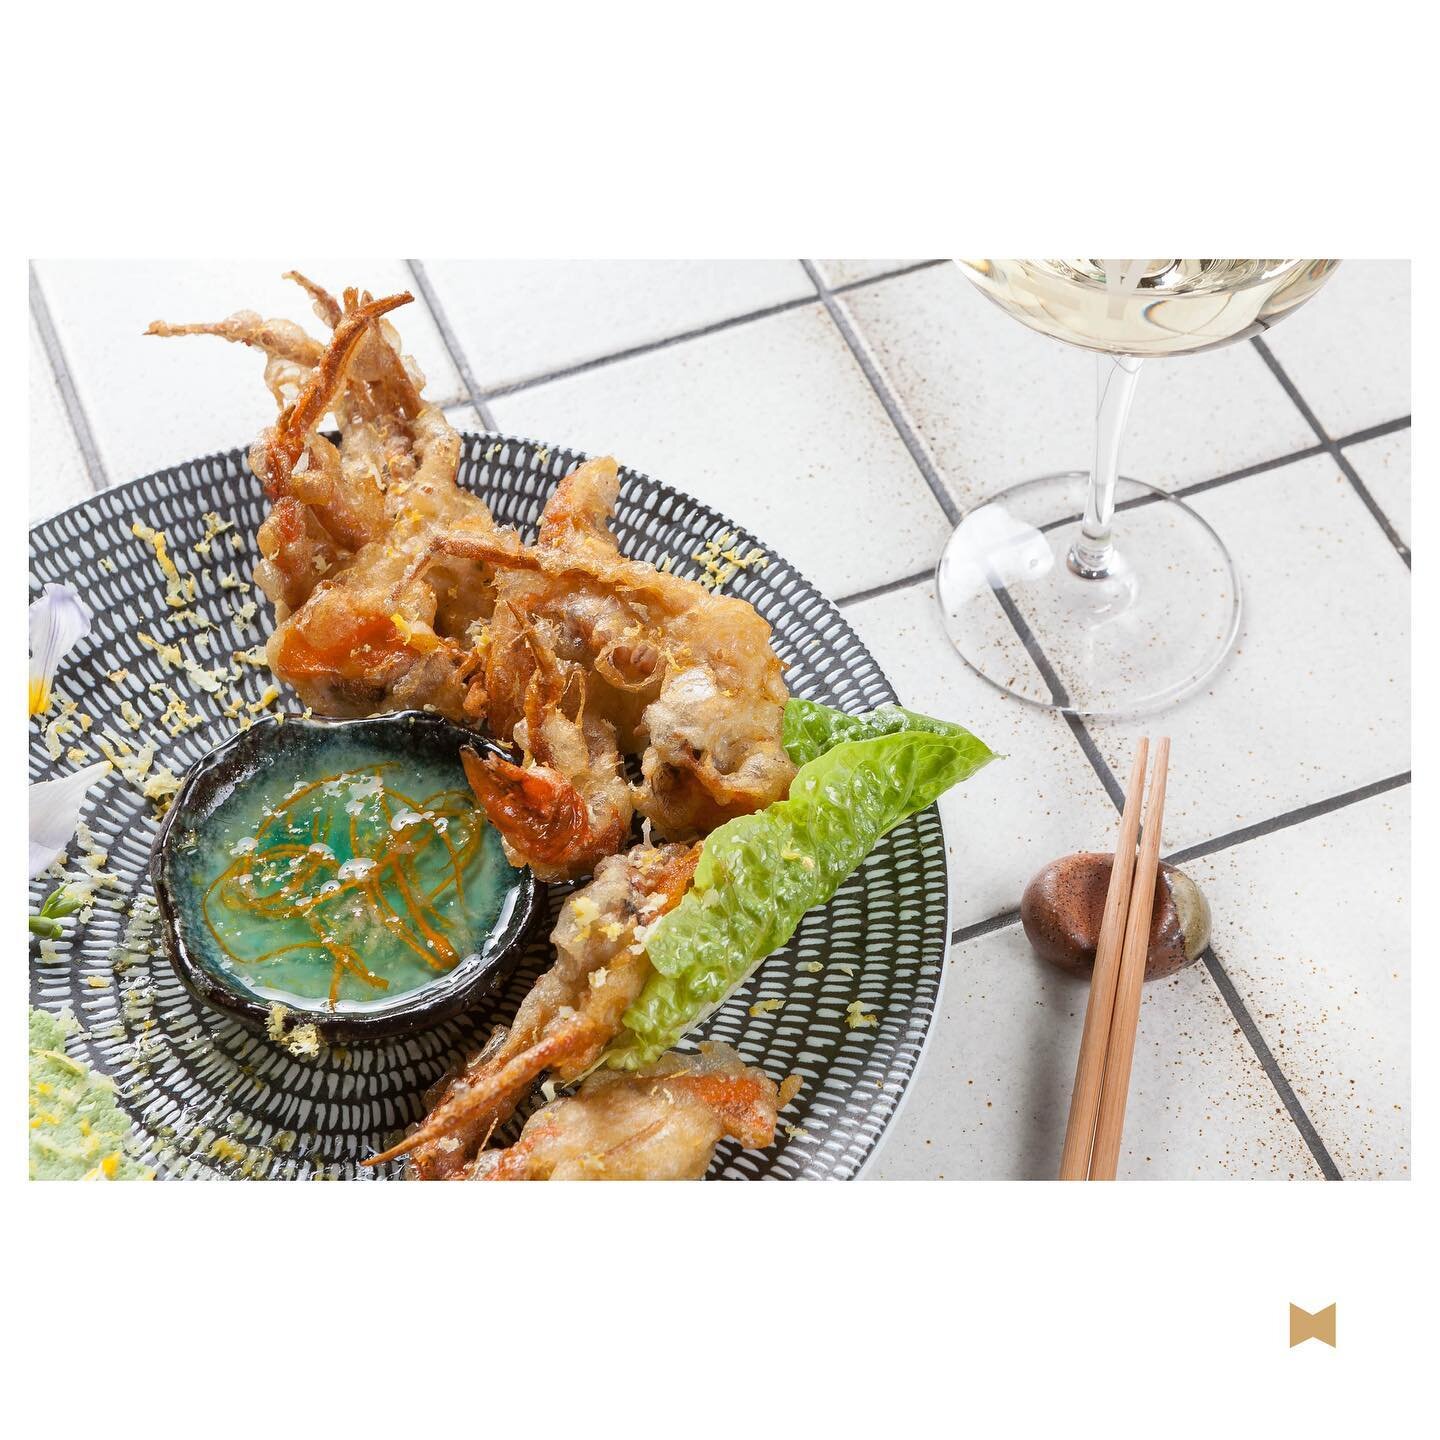 Treat yourself and your comrades on this hump day to RuYi&rsquo;s &lsquo;clawsome&rsquo; citrus scented soft shell crab, as you&rsquo;ve wished. 🌞🦀🦀

One of RuYi&rsquo;s classic dishes; it uses the most premium grade soft shell crab coated with a 